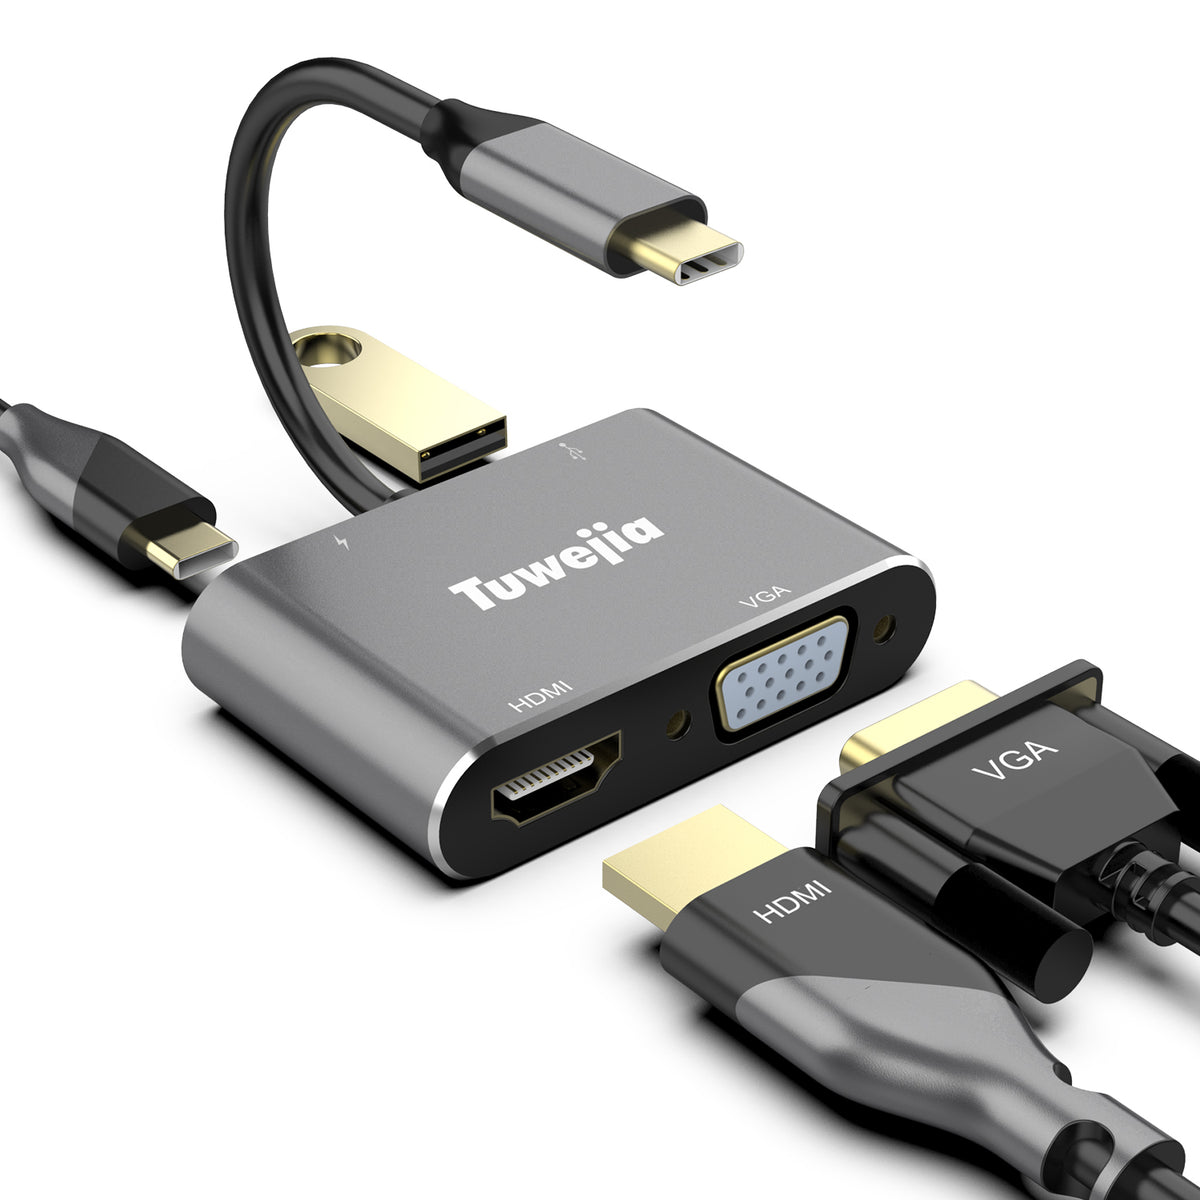 USB C to HDMI VGA Adapter with USB 3.0 Charging Power PD Port – Tuwejia